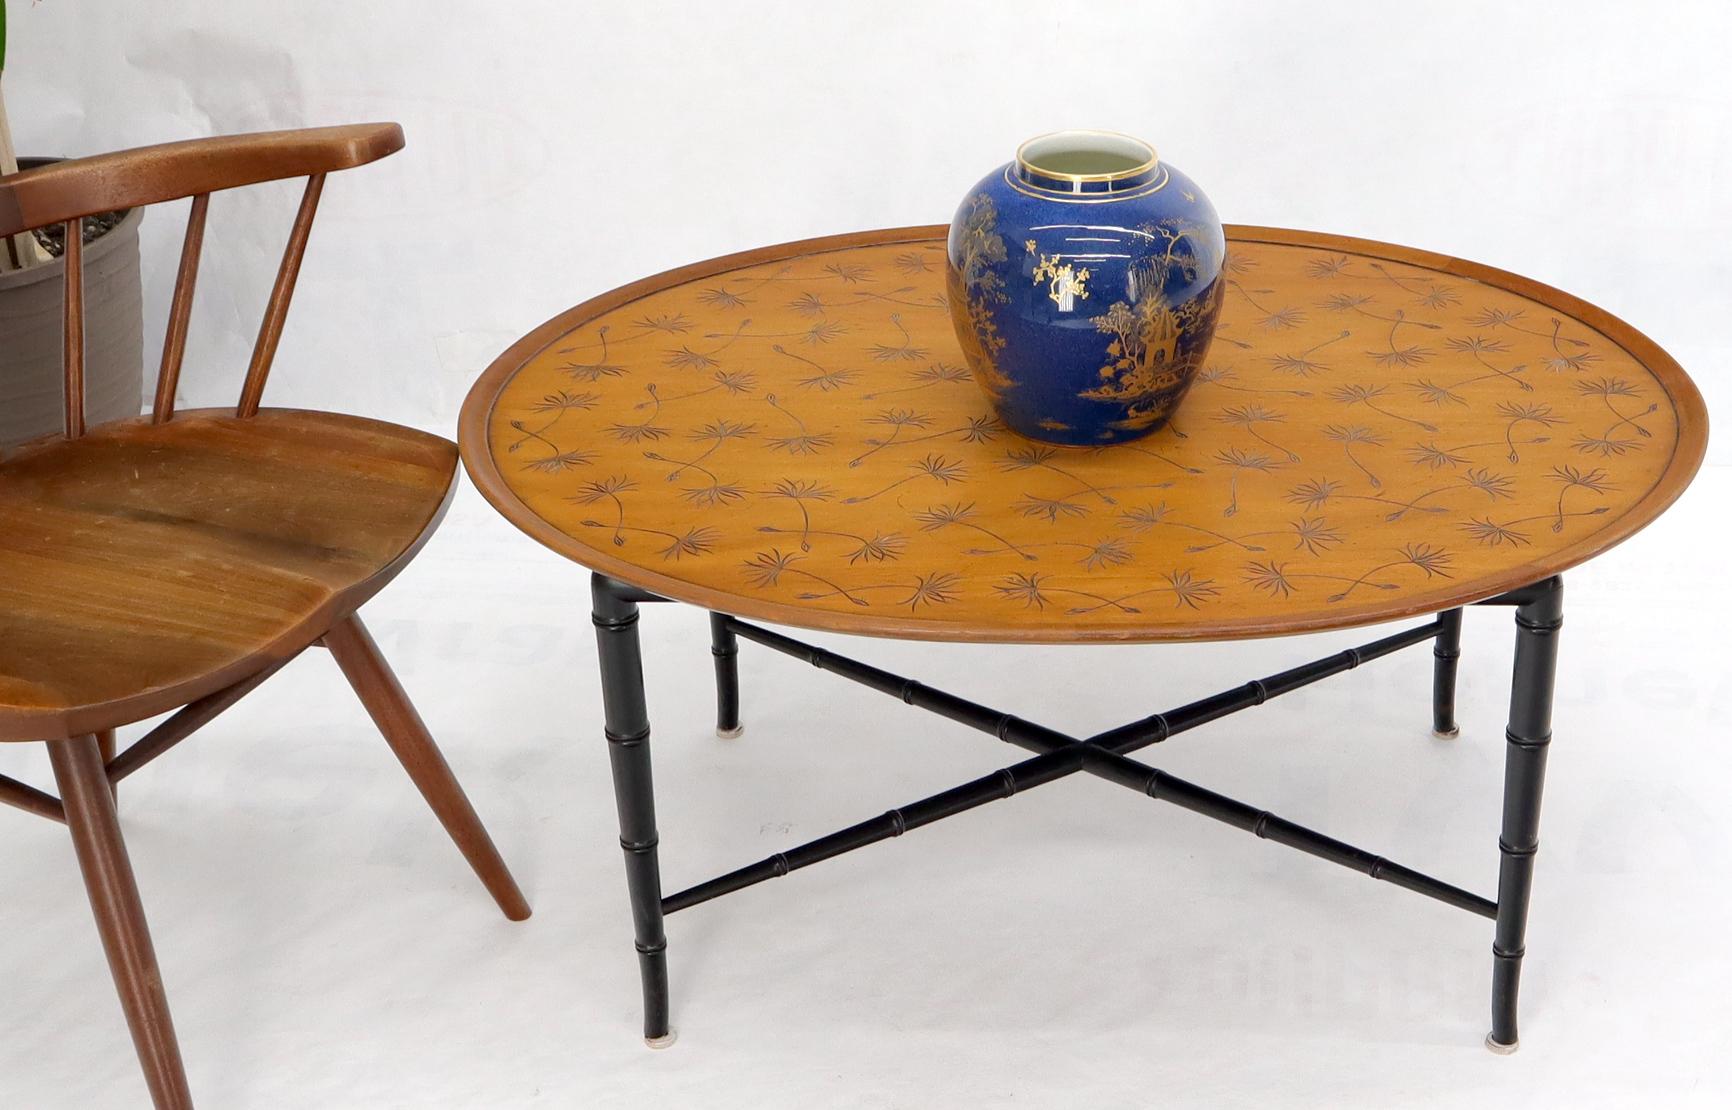 20th Century Oval Kittinger Coffee Table Faux Bamboo Tapered Legs Incised Leafs Design on Top For Sale